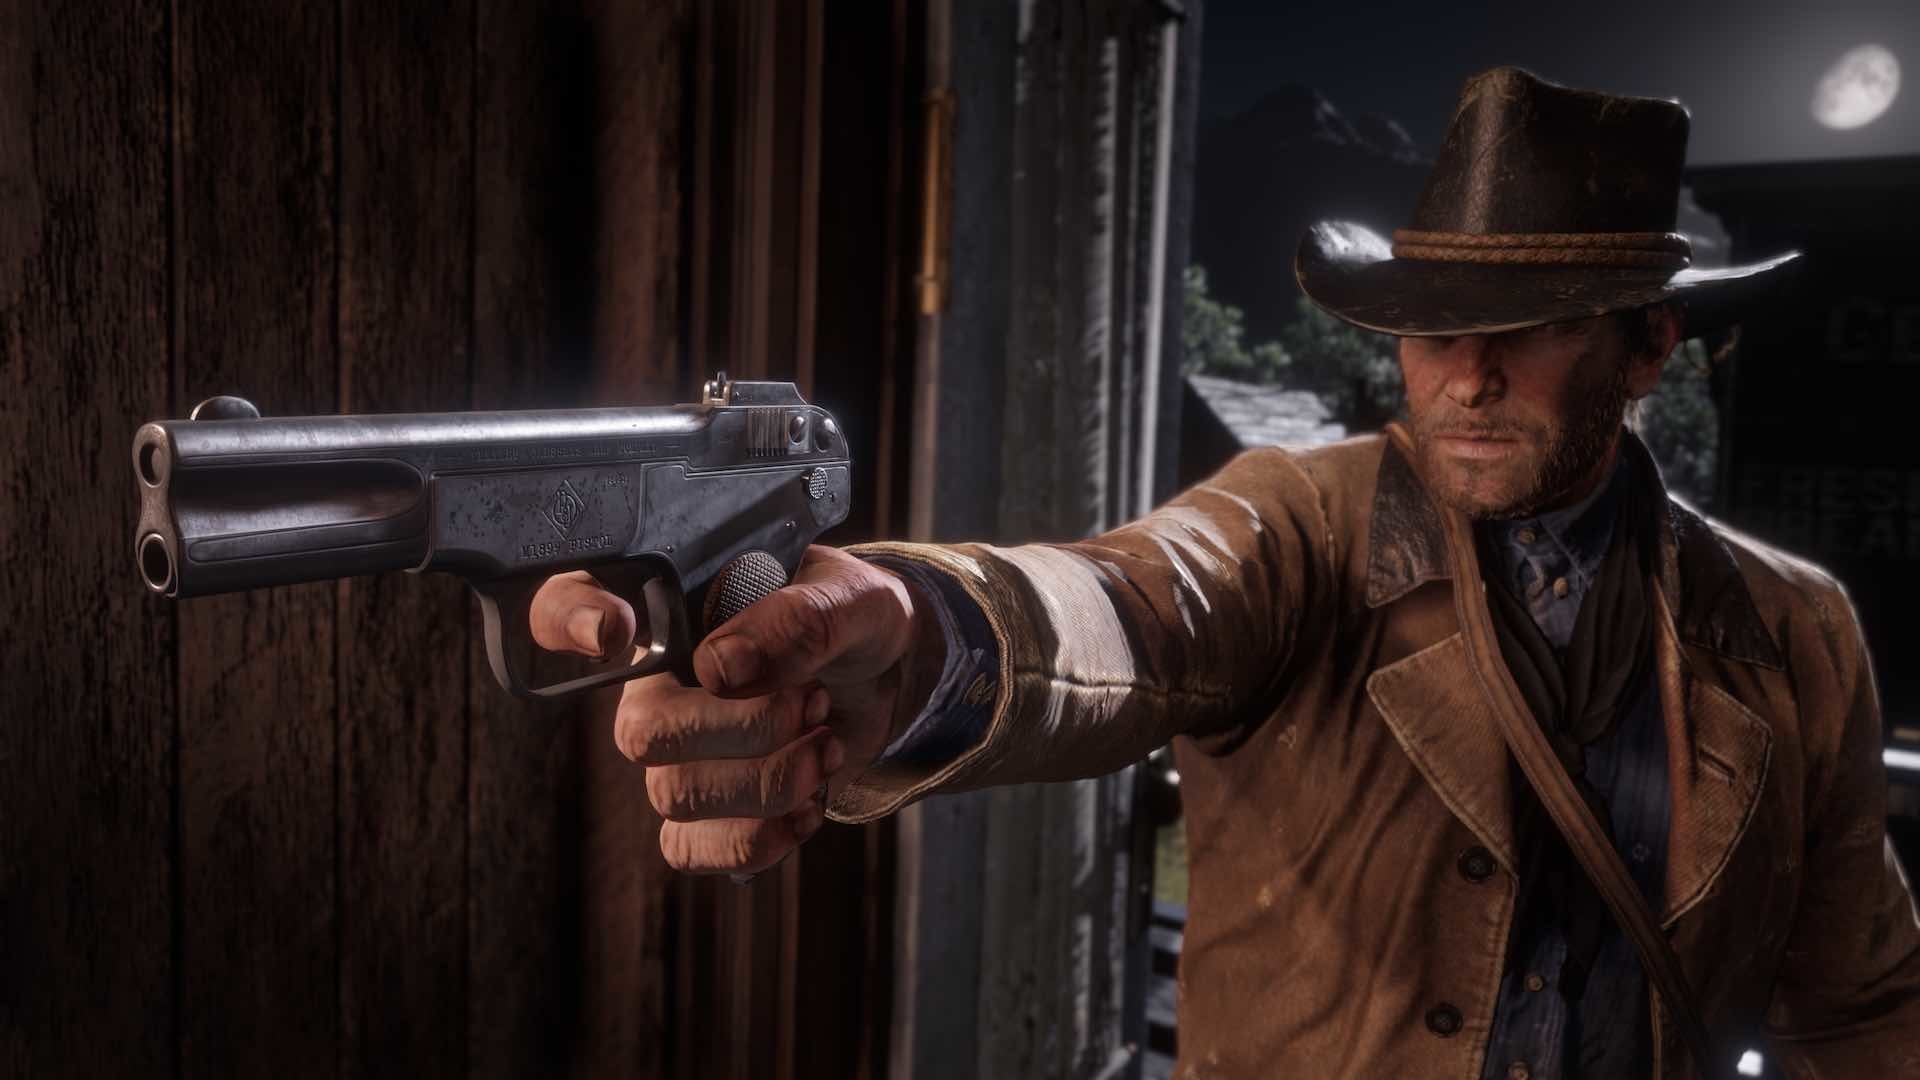 Red Dead Redemption 2 On PC: Here Are The System Requirements - GameSpot